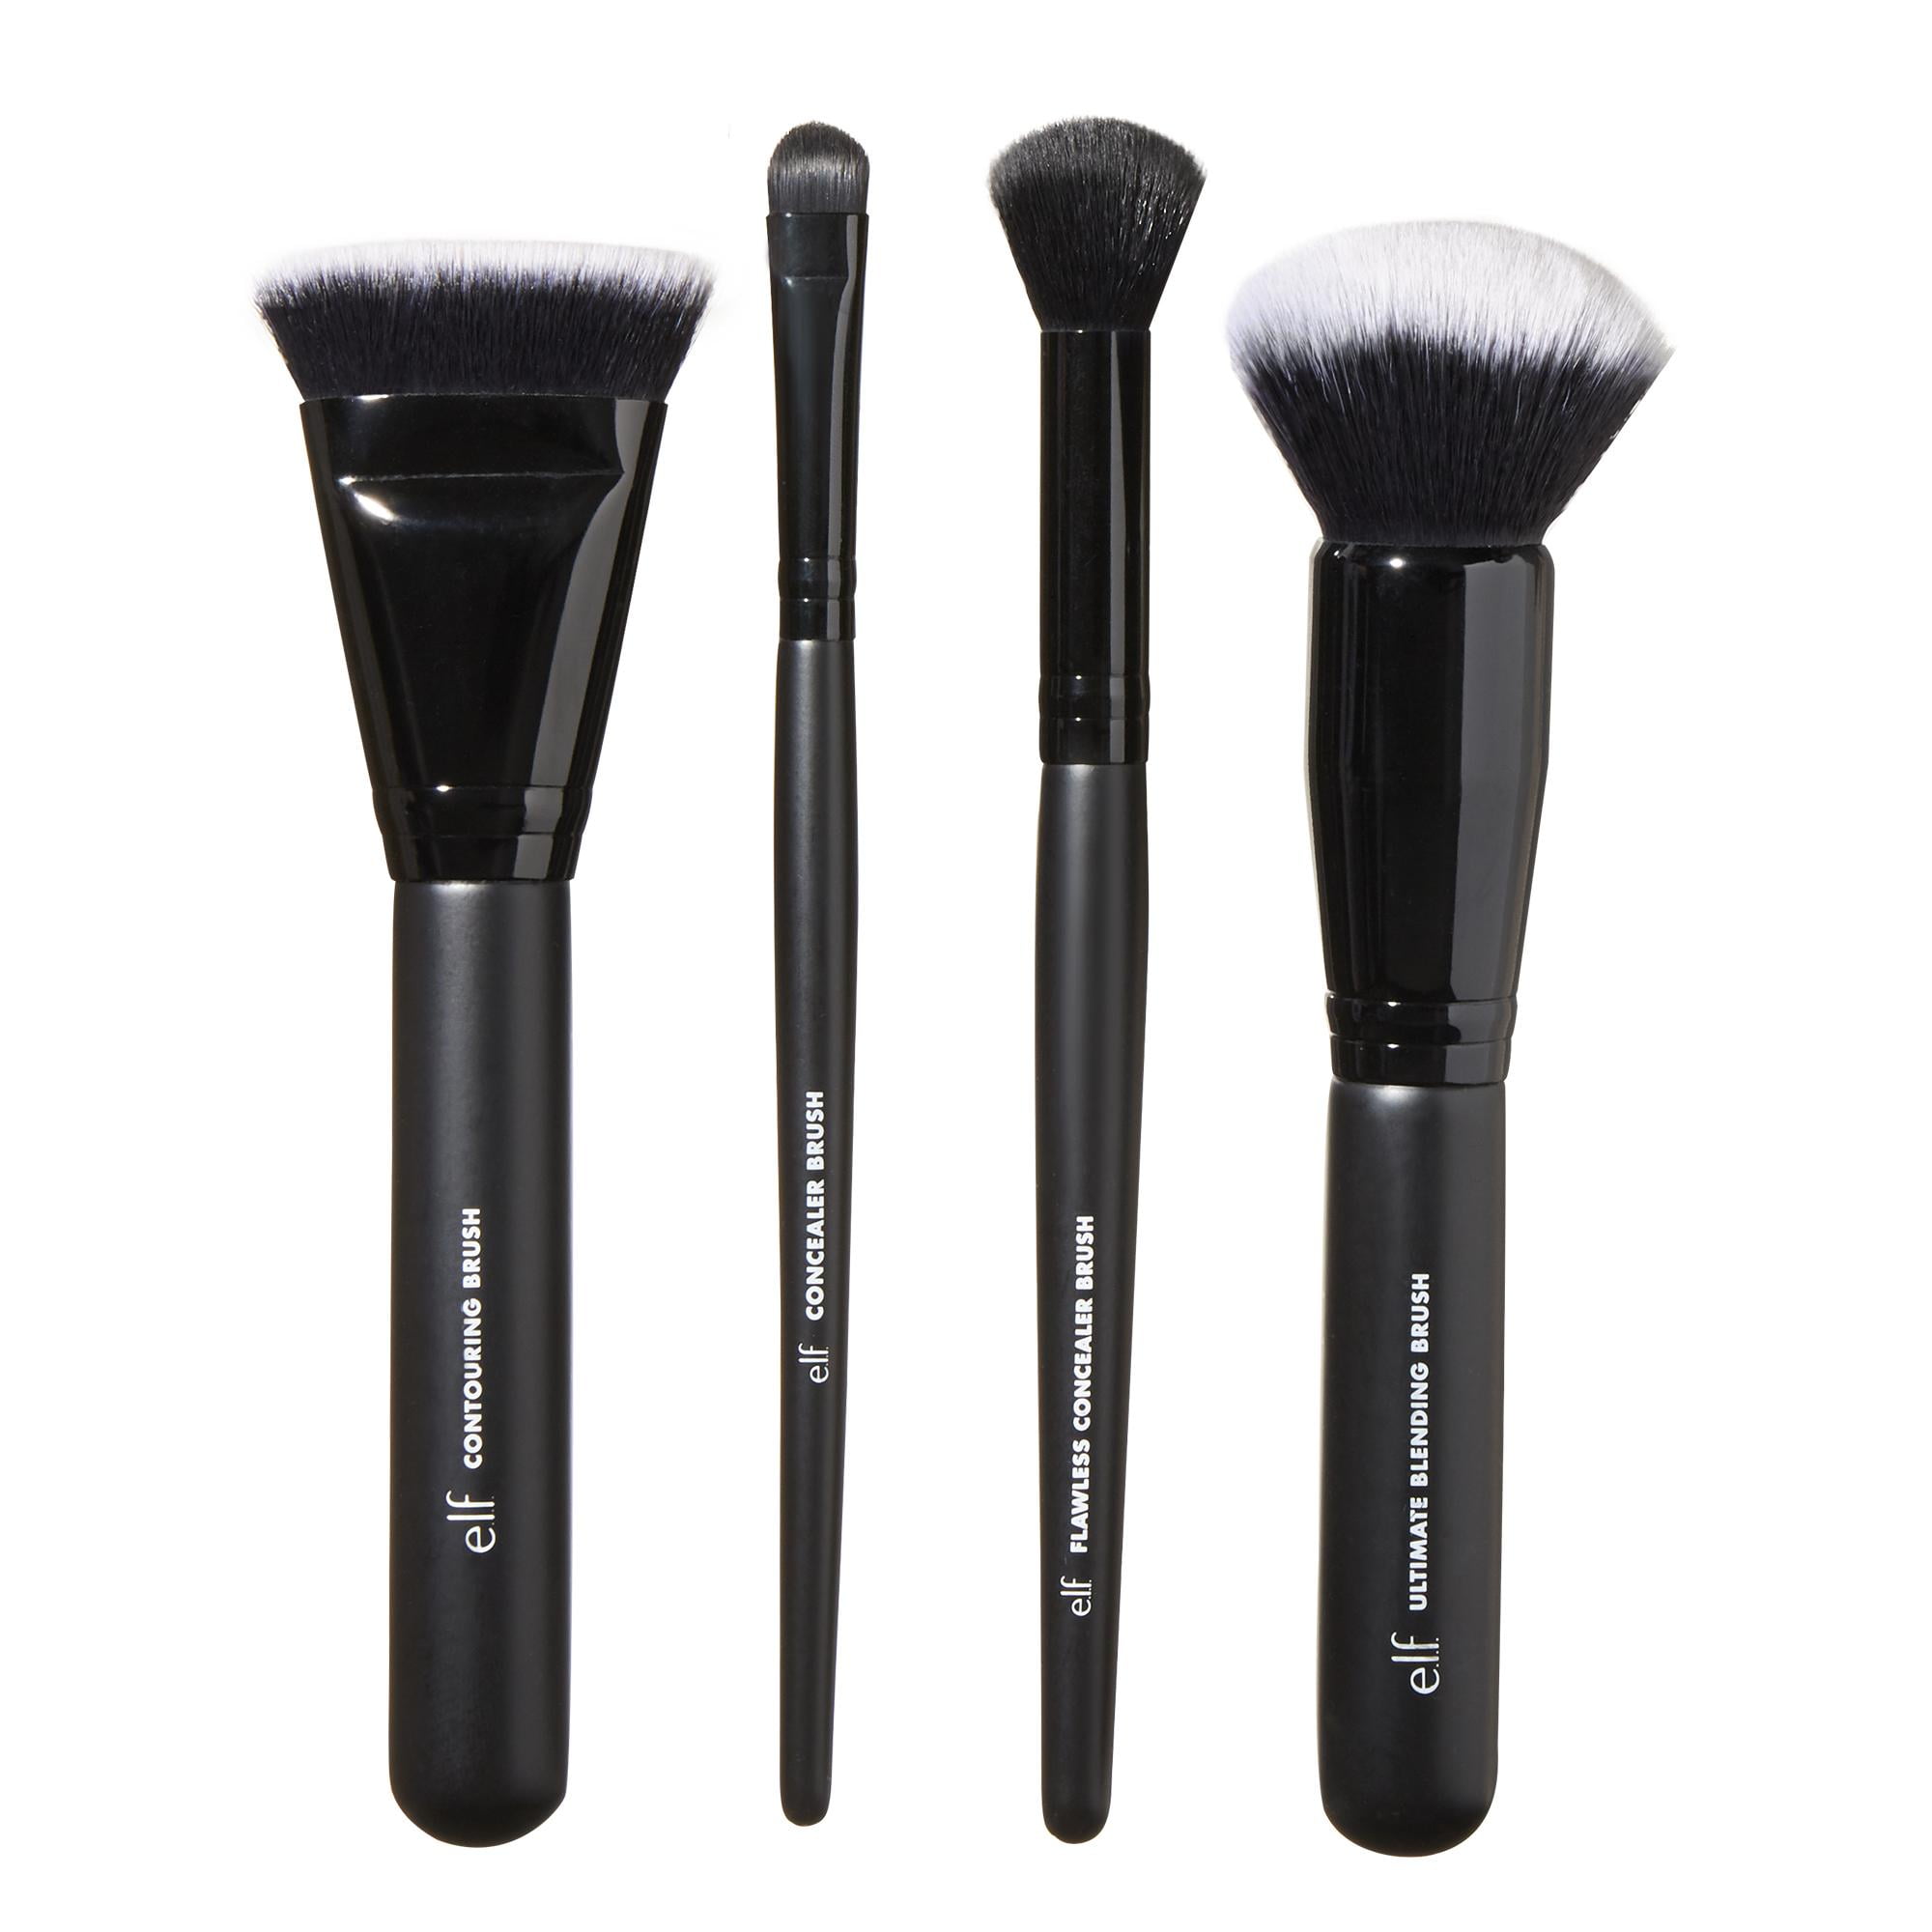 e.l.f. Complexion Perfection Face Brush Kit